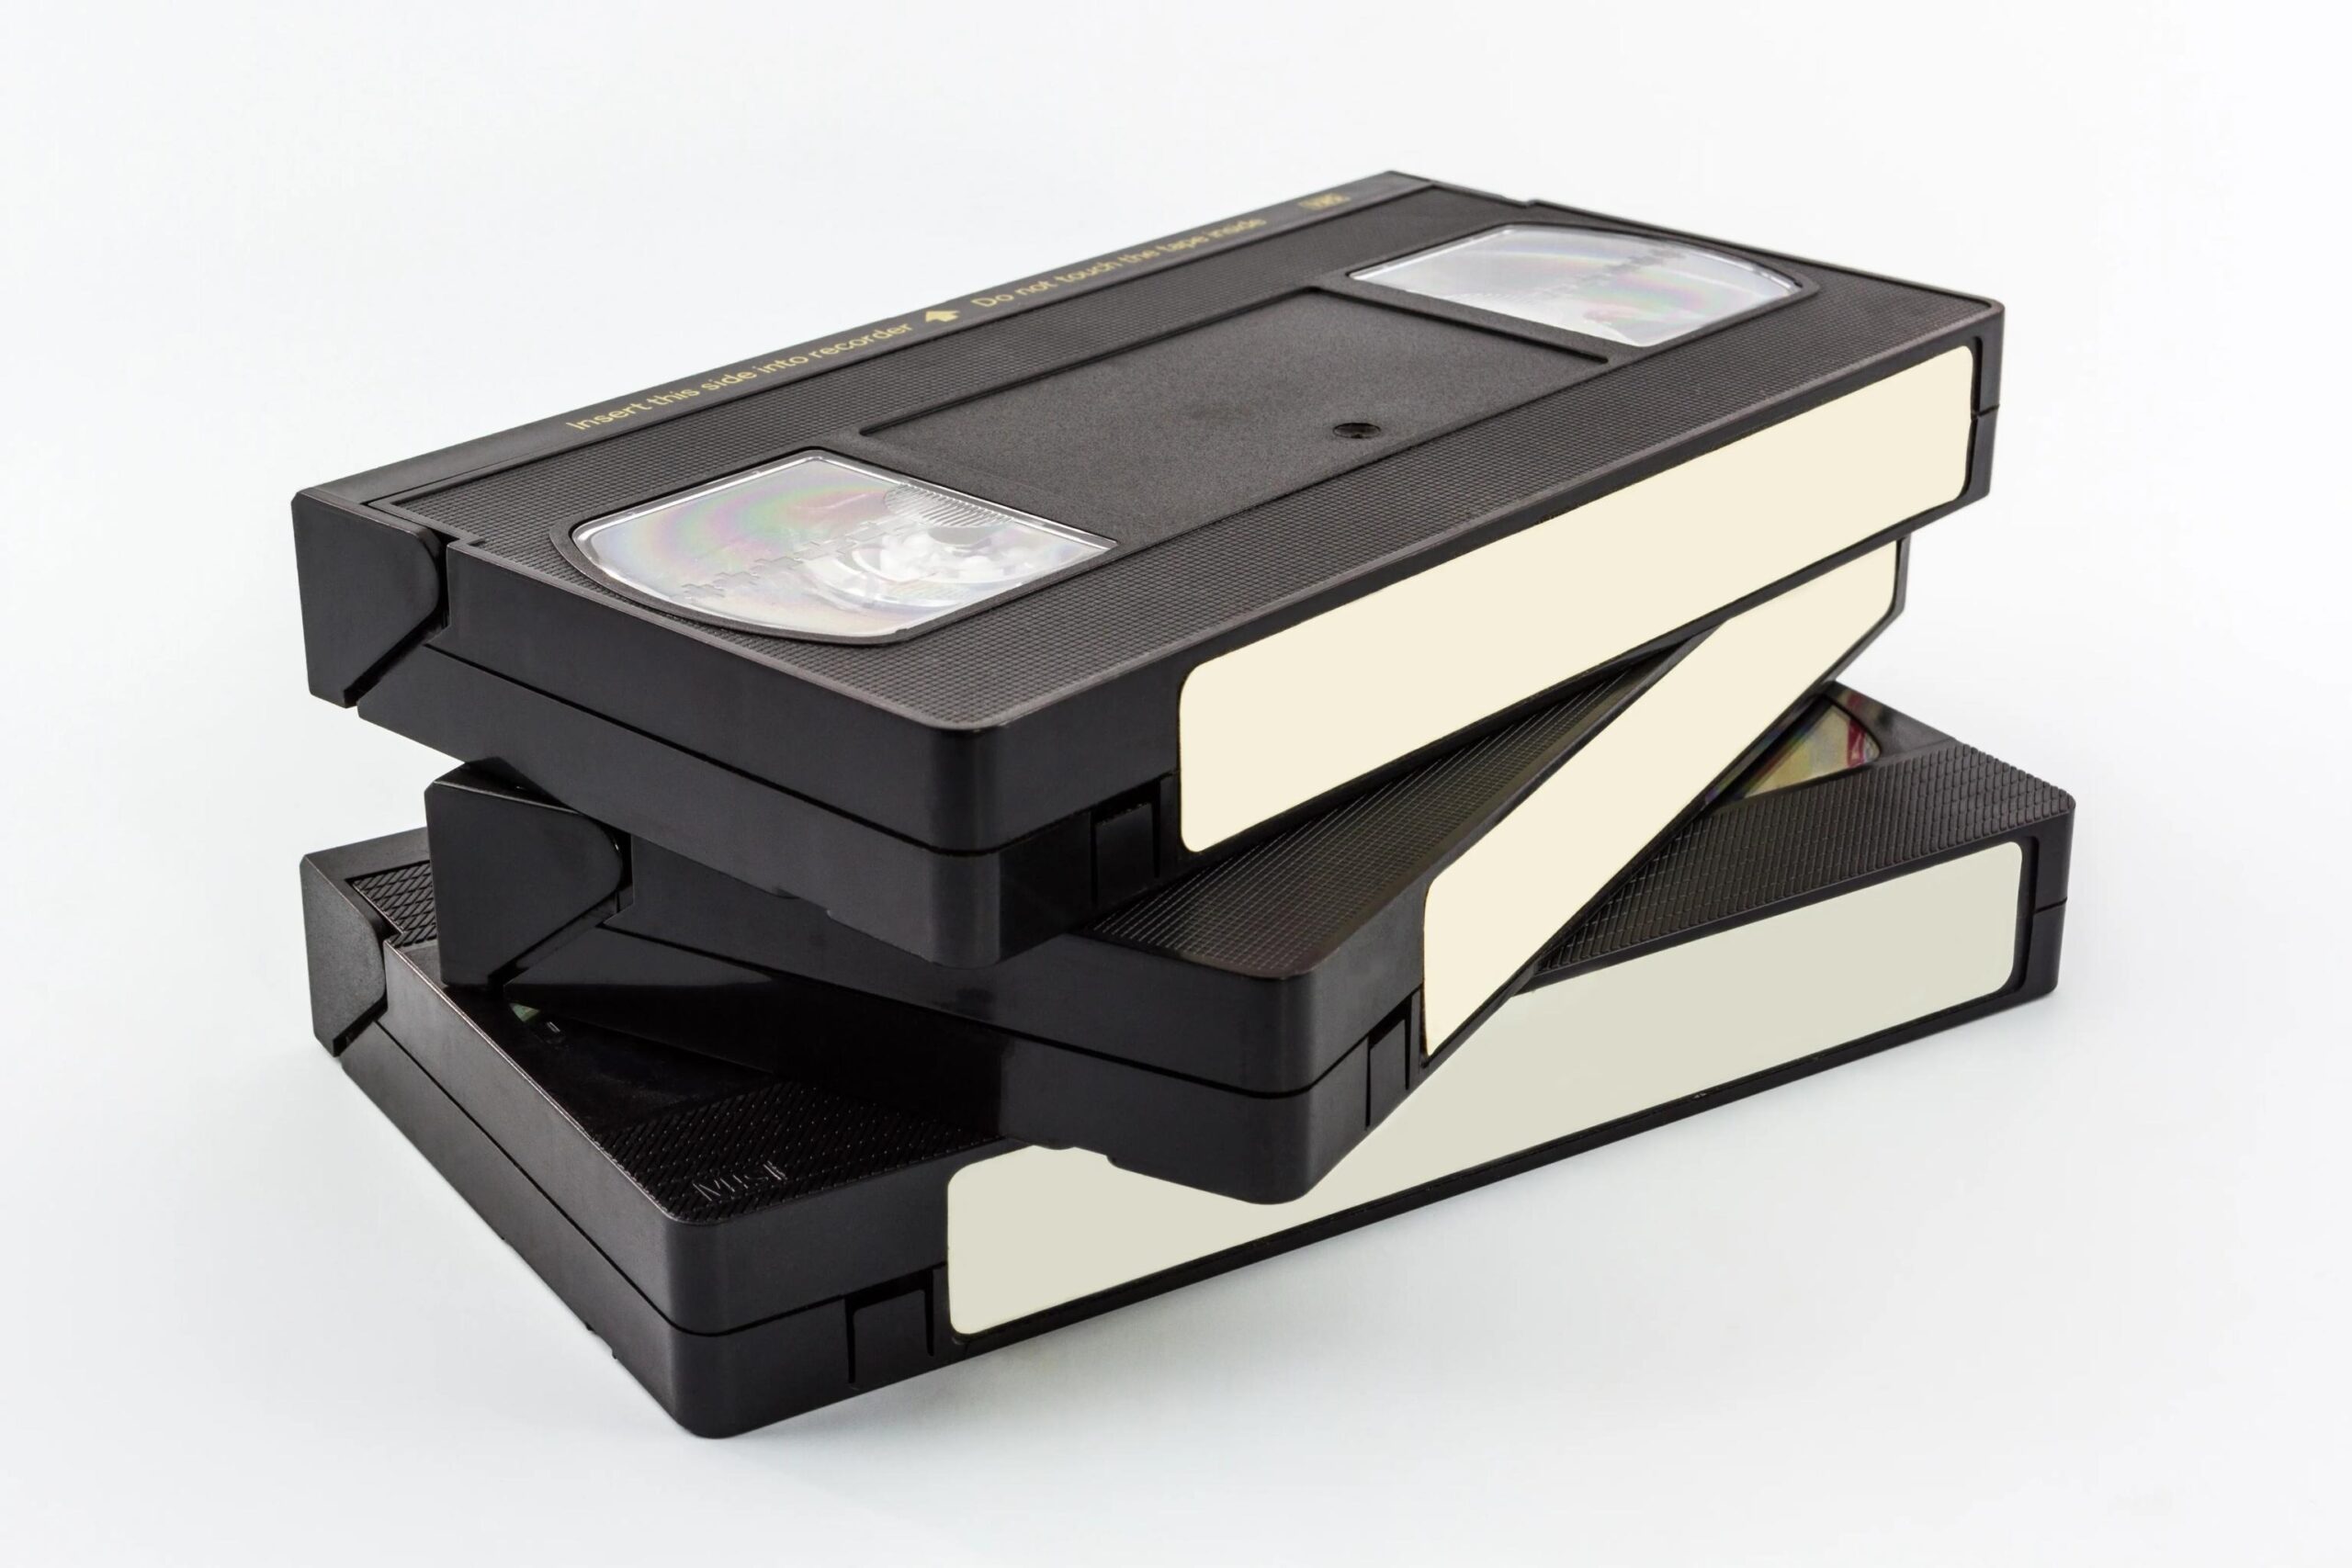 An Image of a stack of VHS tapes